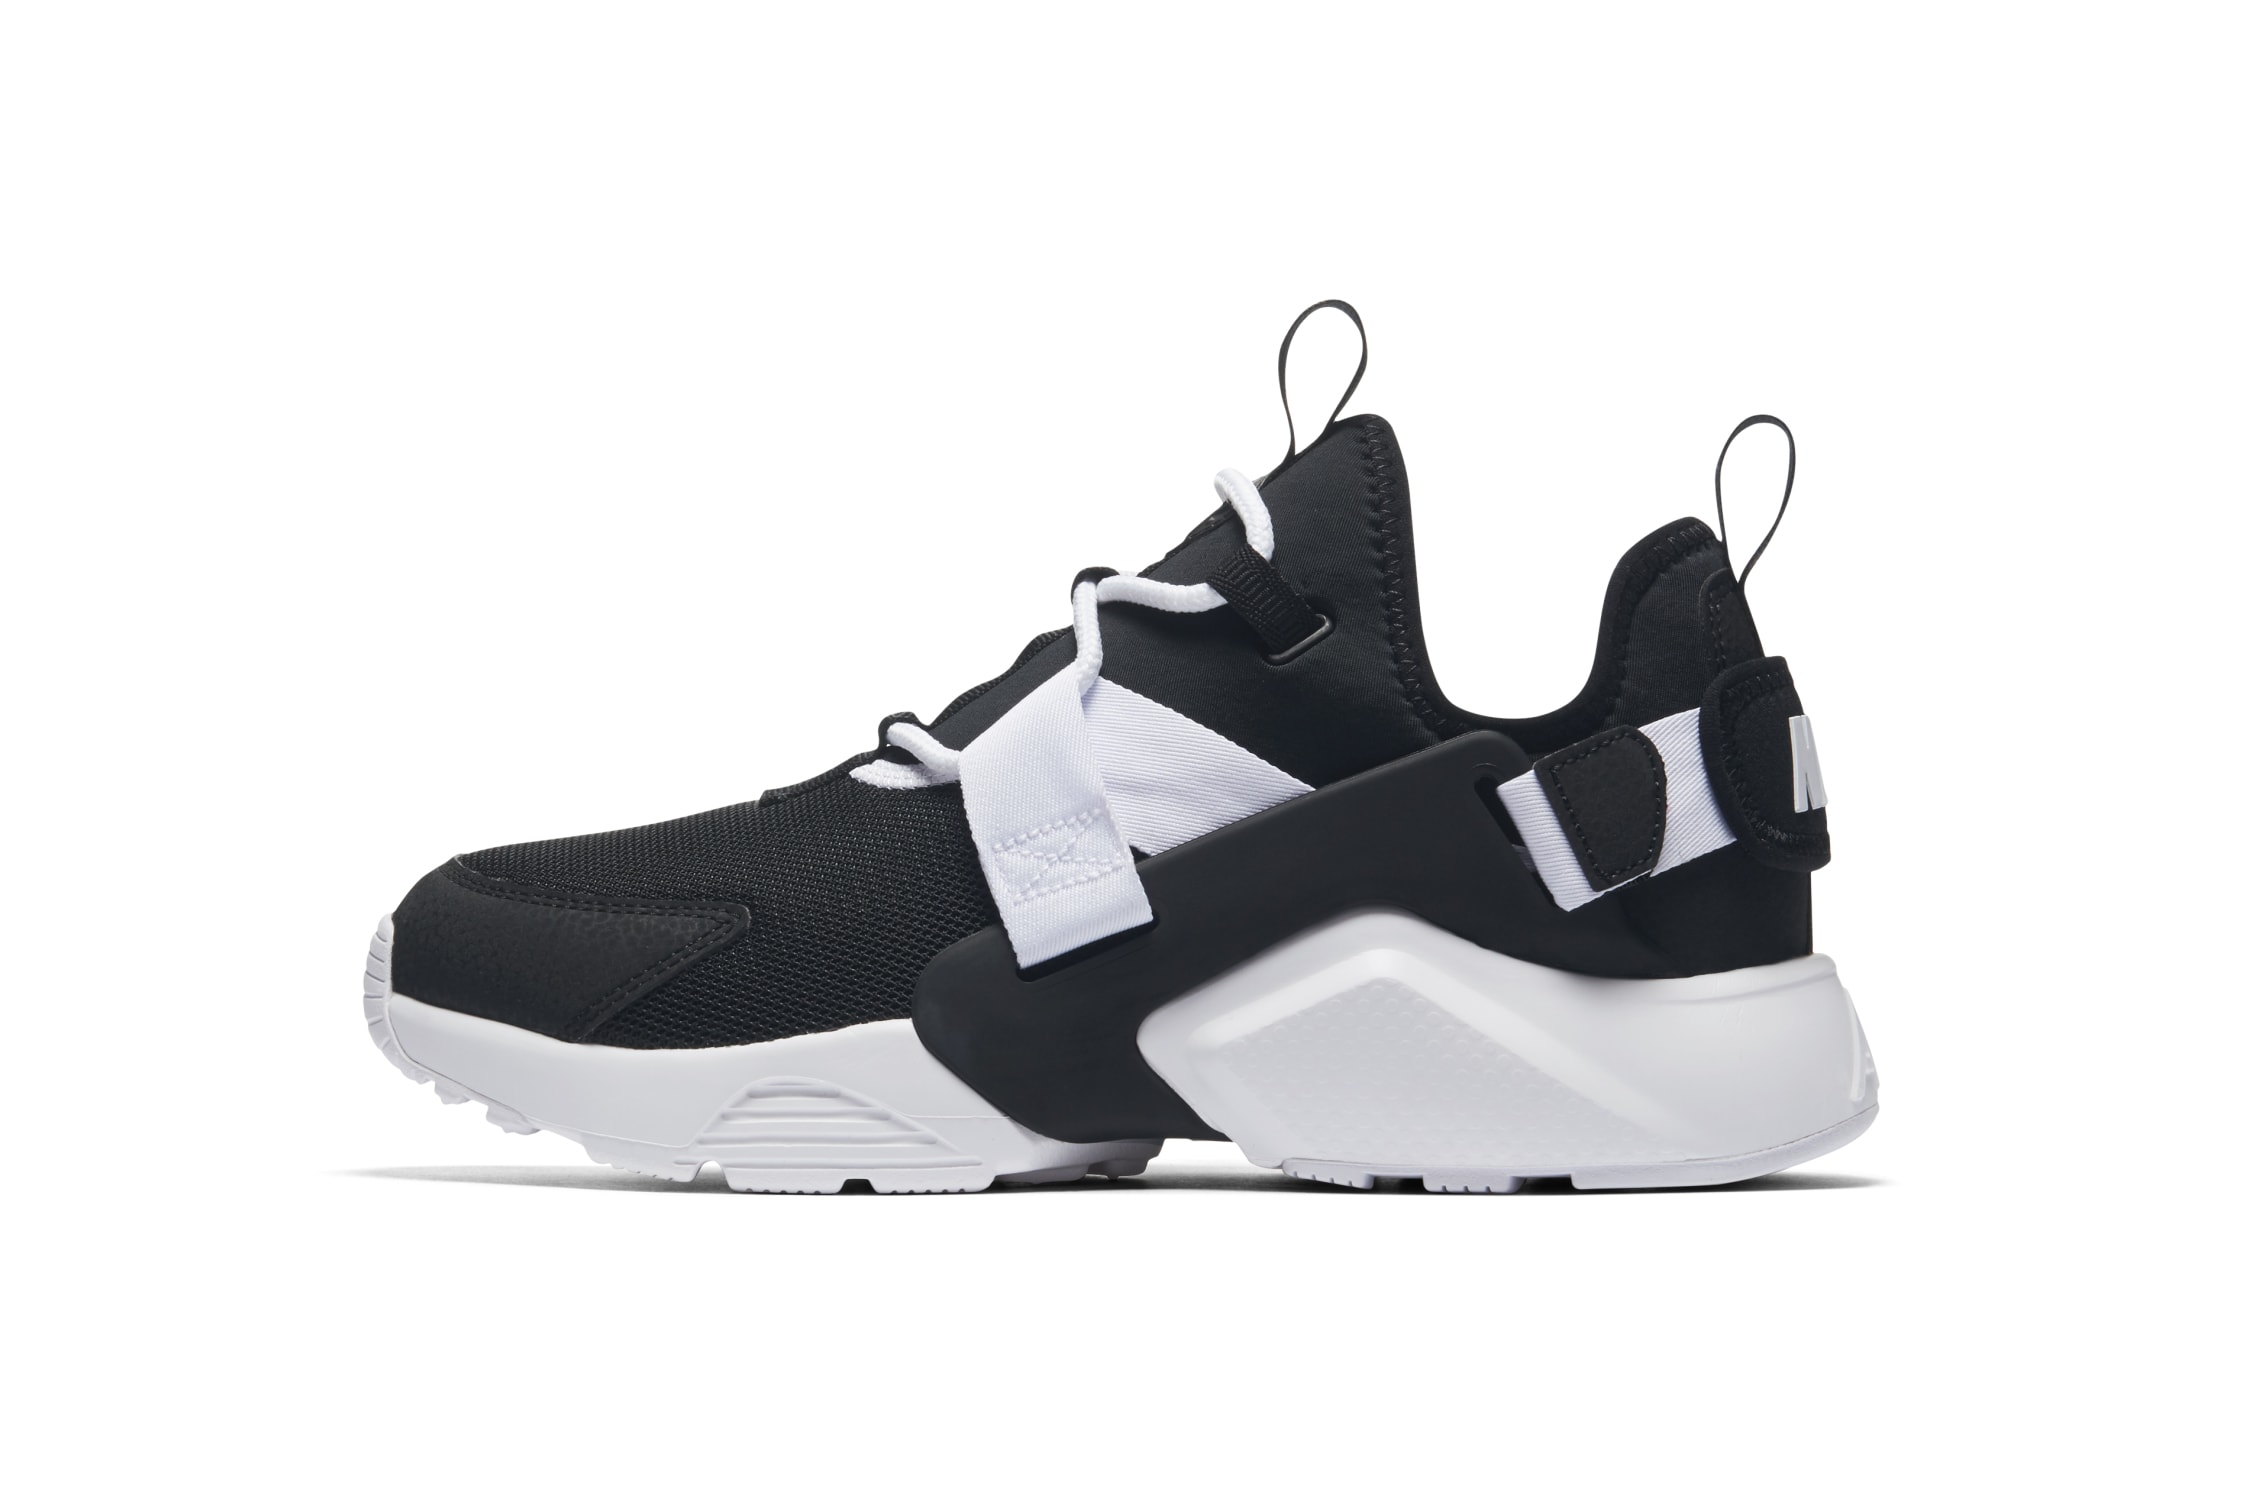 See the New Nike Air Huarache City Low